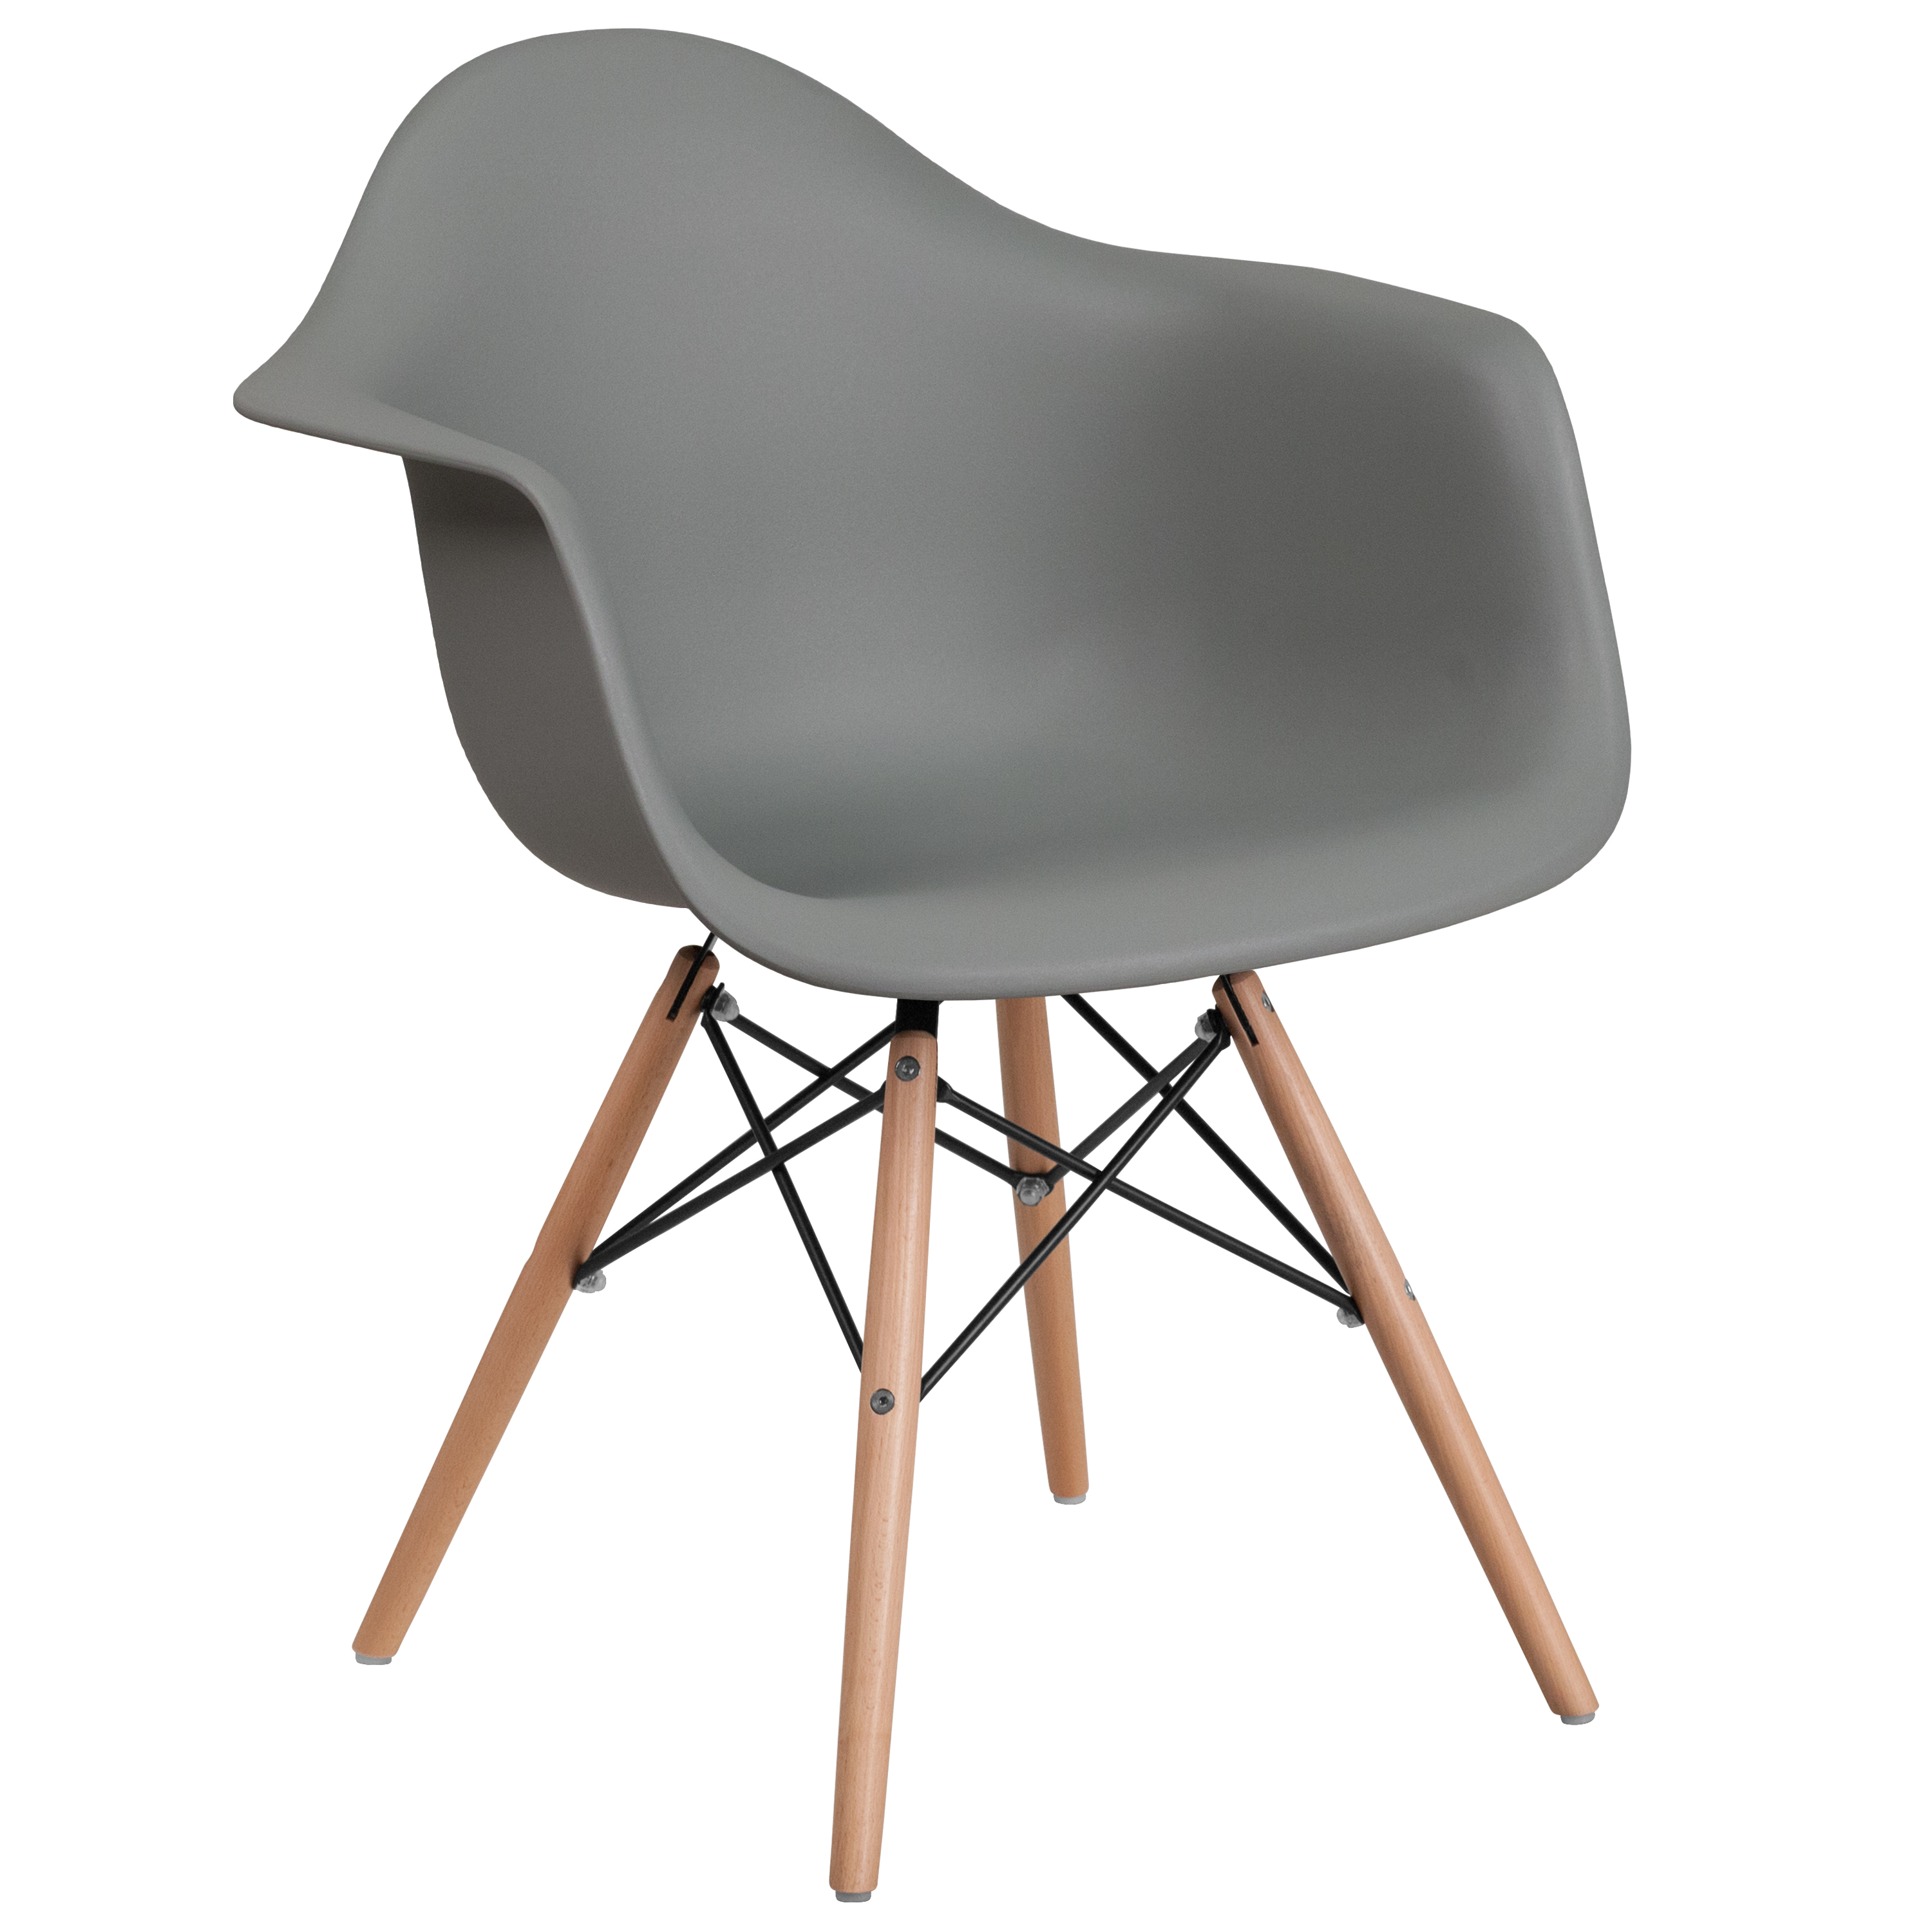 Flash Furniture FH-132-DPP-GY-GG Alonza Series Moss Gray Plastic Chair with Wooden Legs